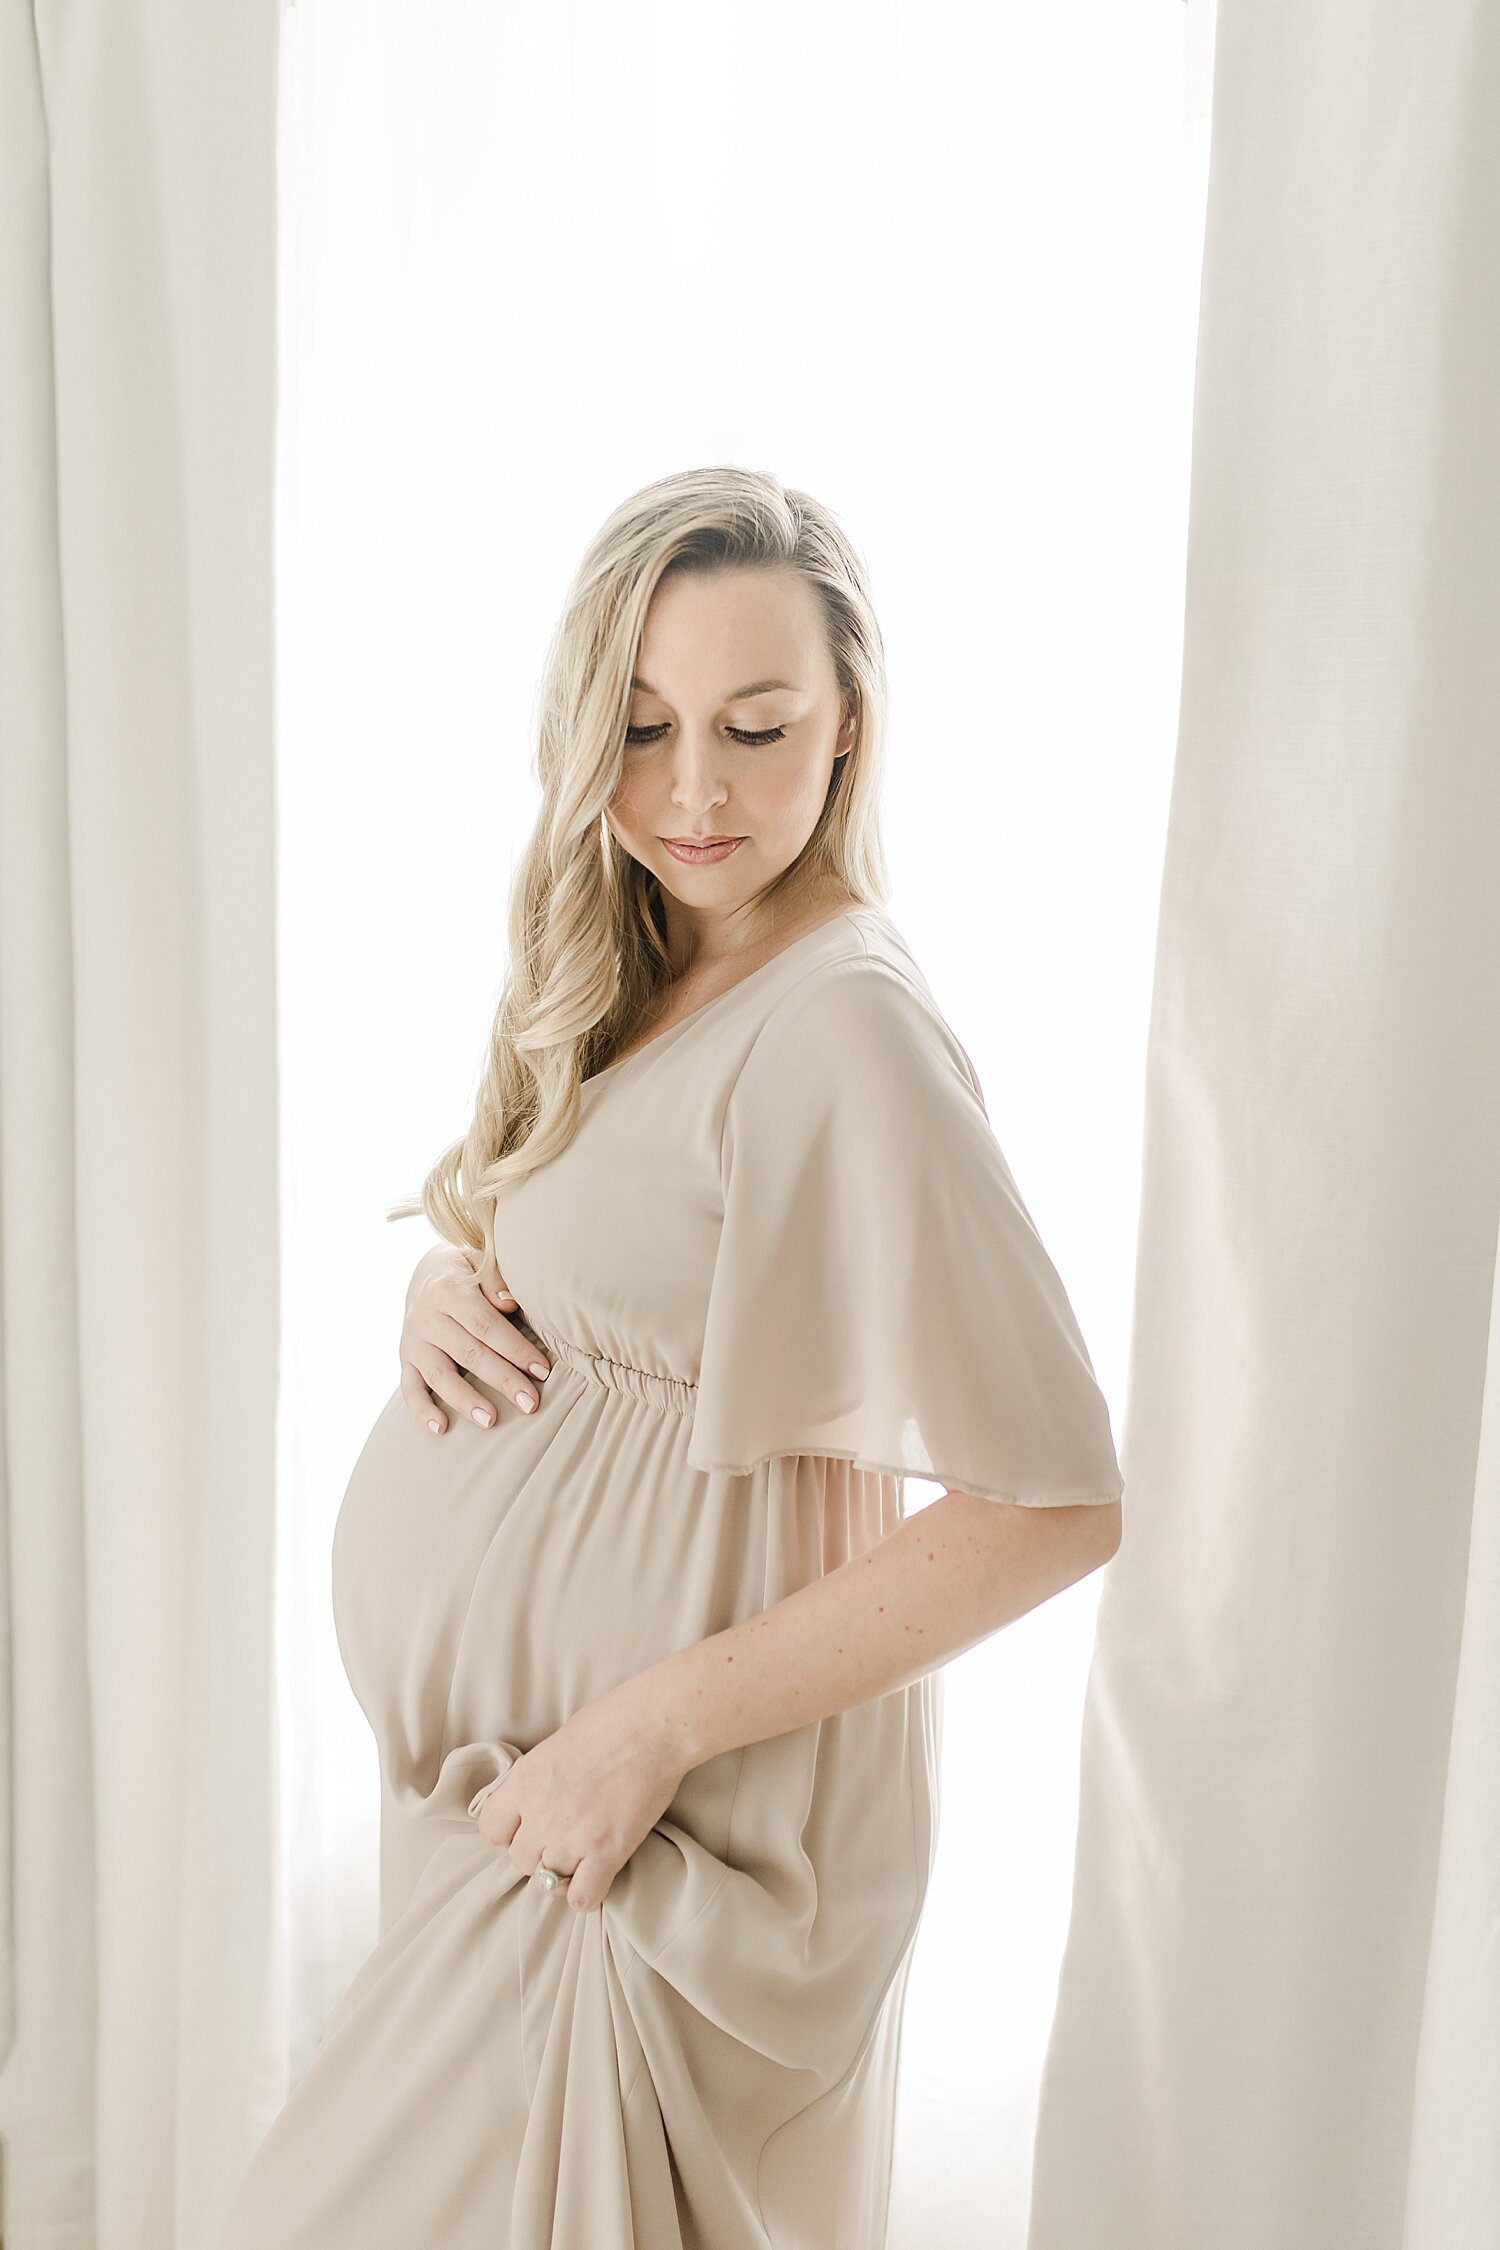 In-home maternity session in Samford, CT with Kristin Wood Photography.